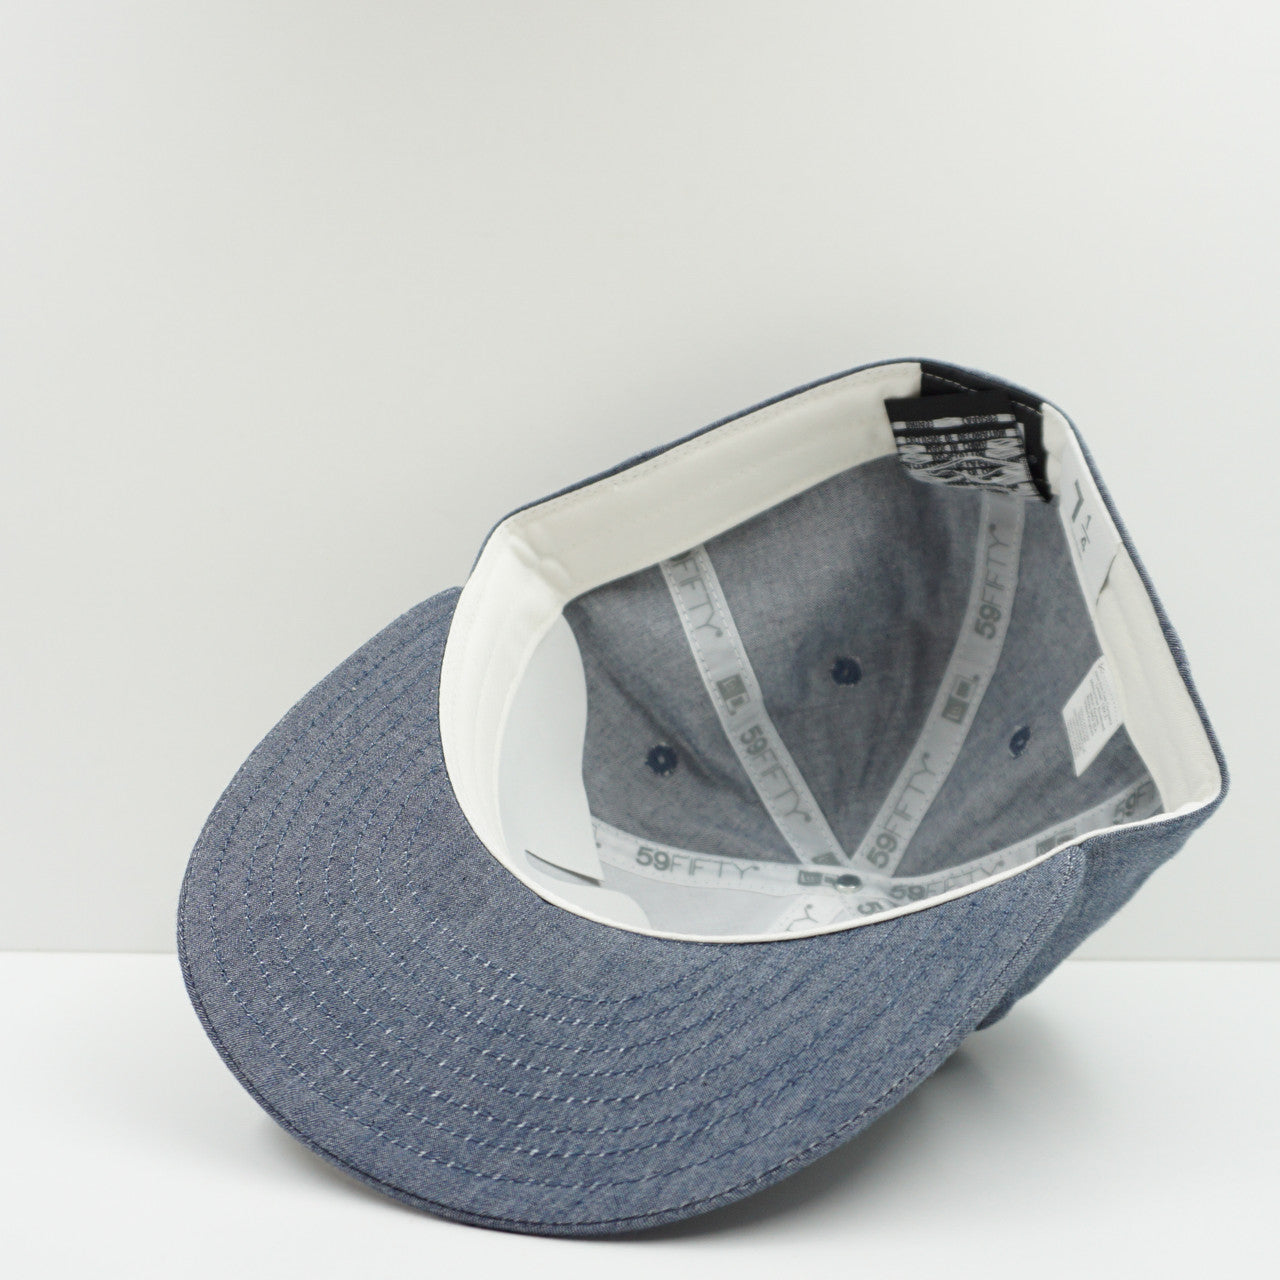 New Era Jeans Fitted Cap